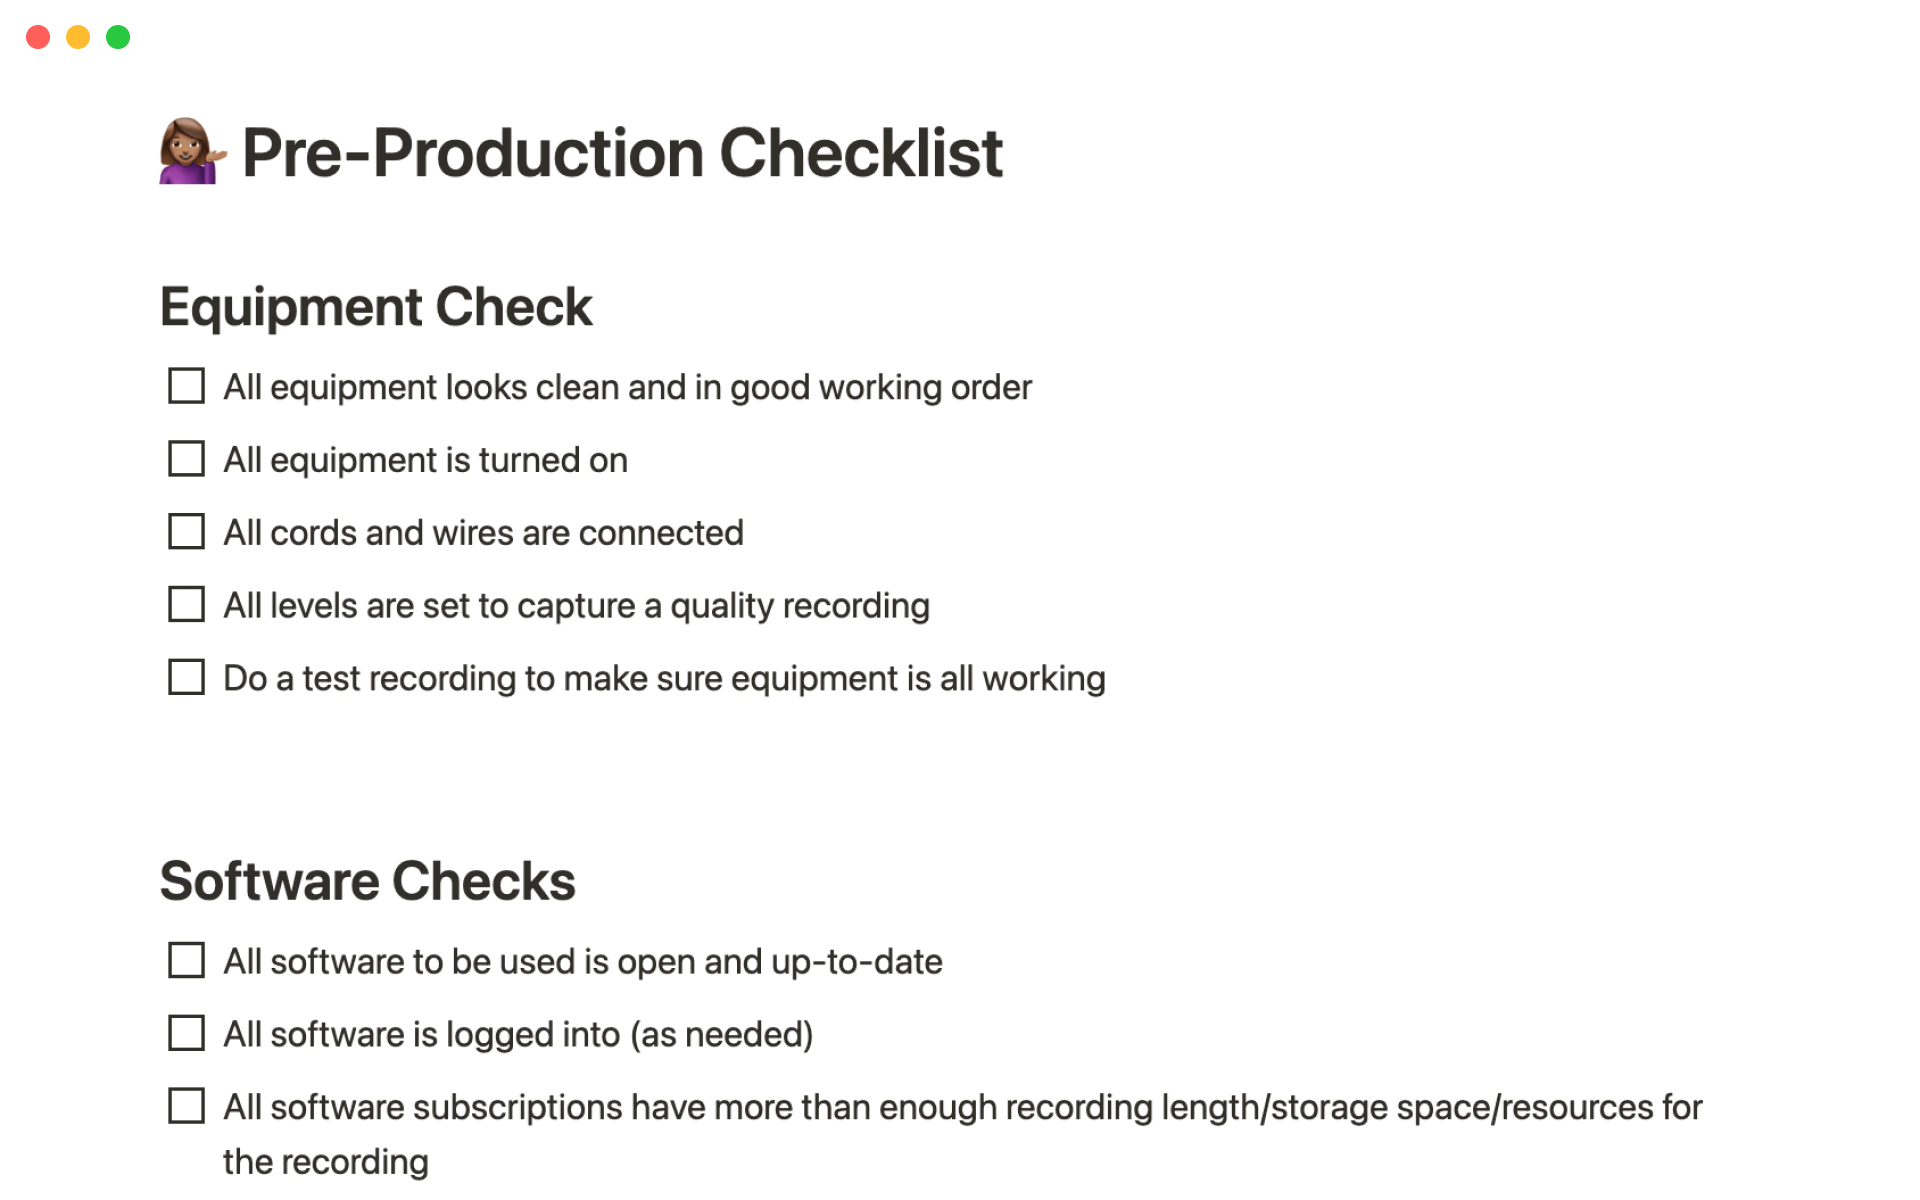 This template is perfect for running through a consistent process when producing ongoing podcast episodes.